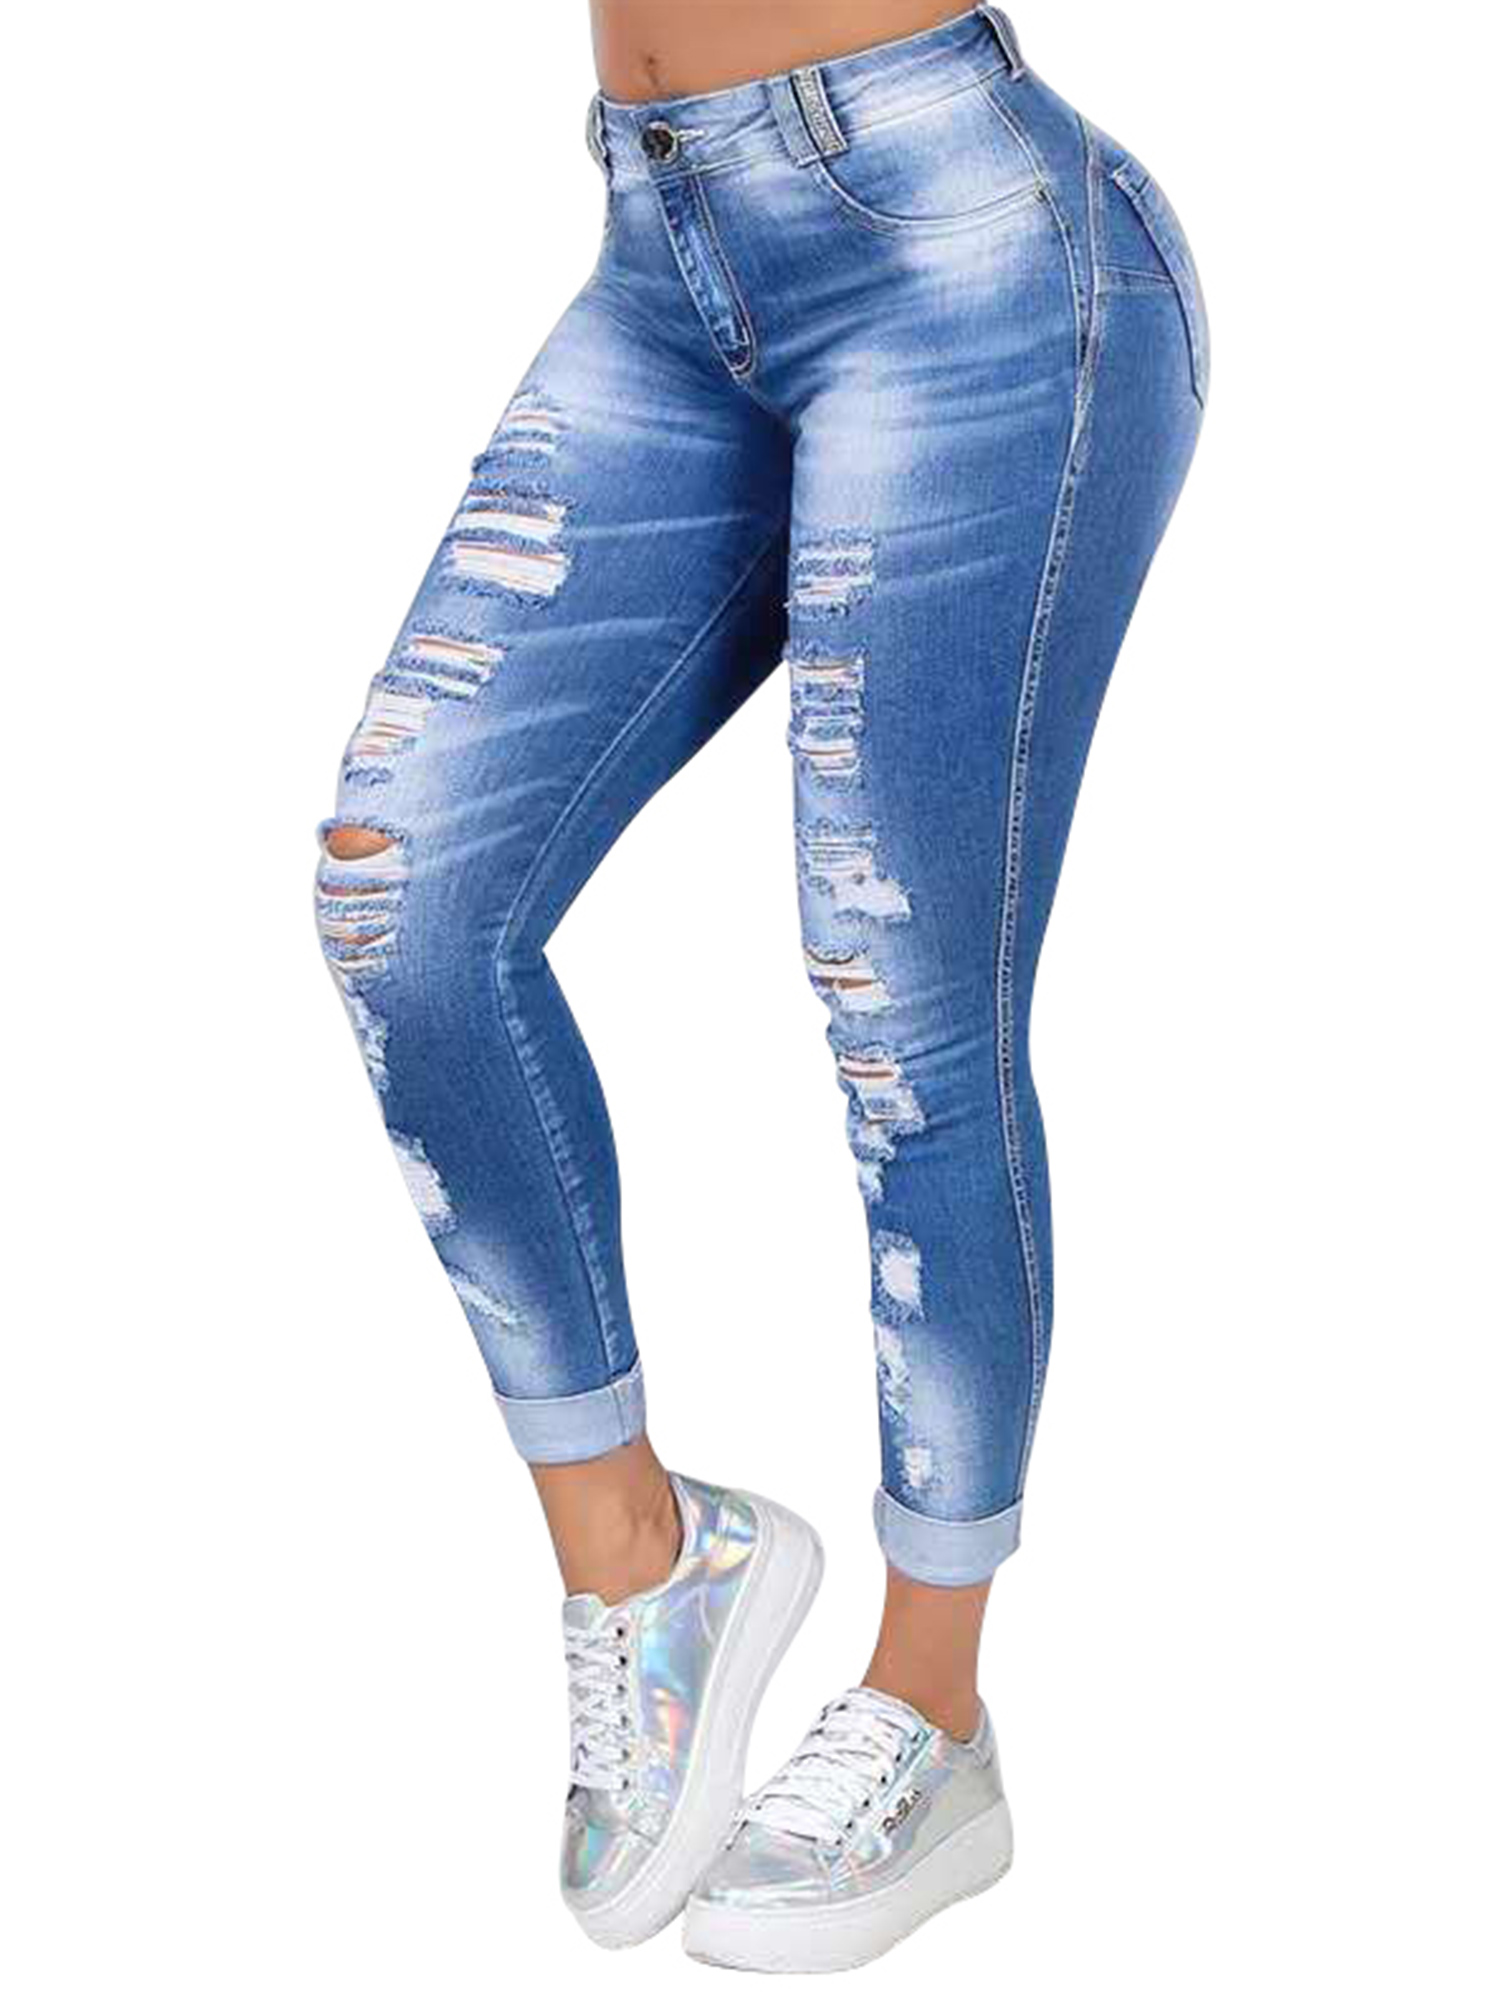 Ripped Distressed Jeans For Women Mid Rise Skinny Slim Fit Jeans Ladies Cut Denim Trouser Pants For Juniors - image 1 of 3